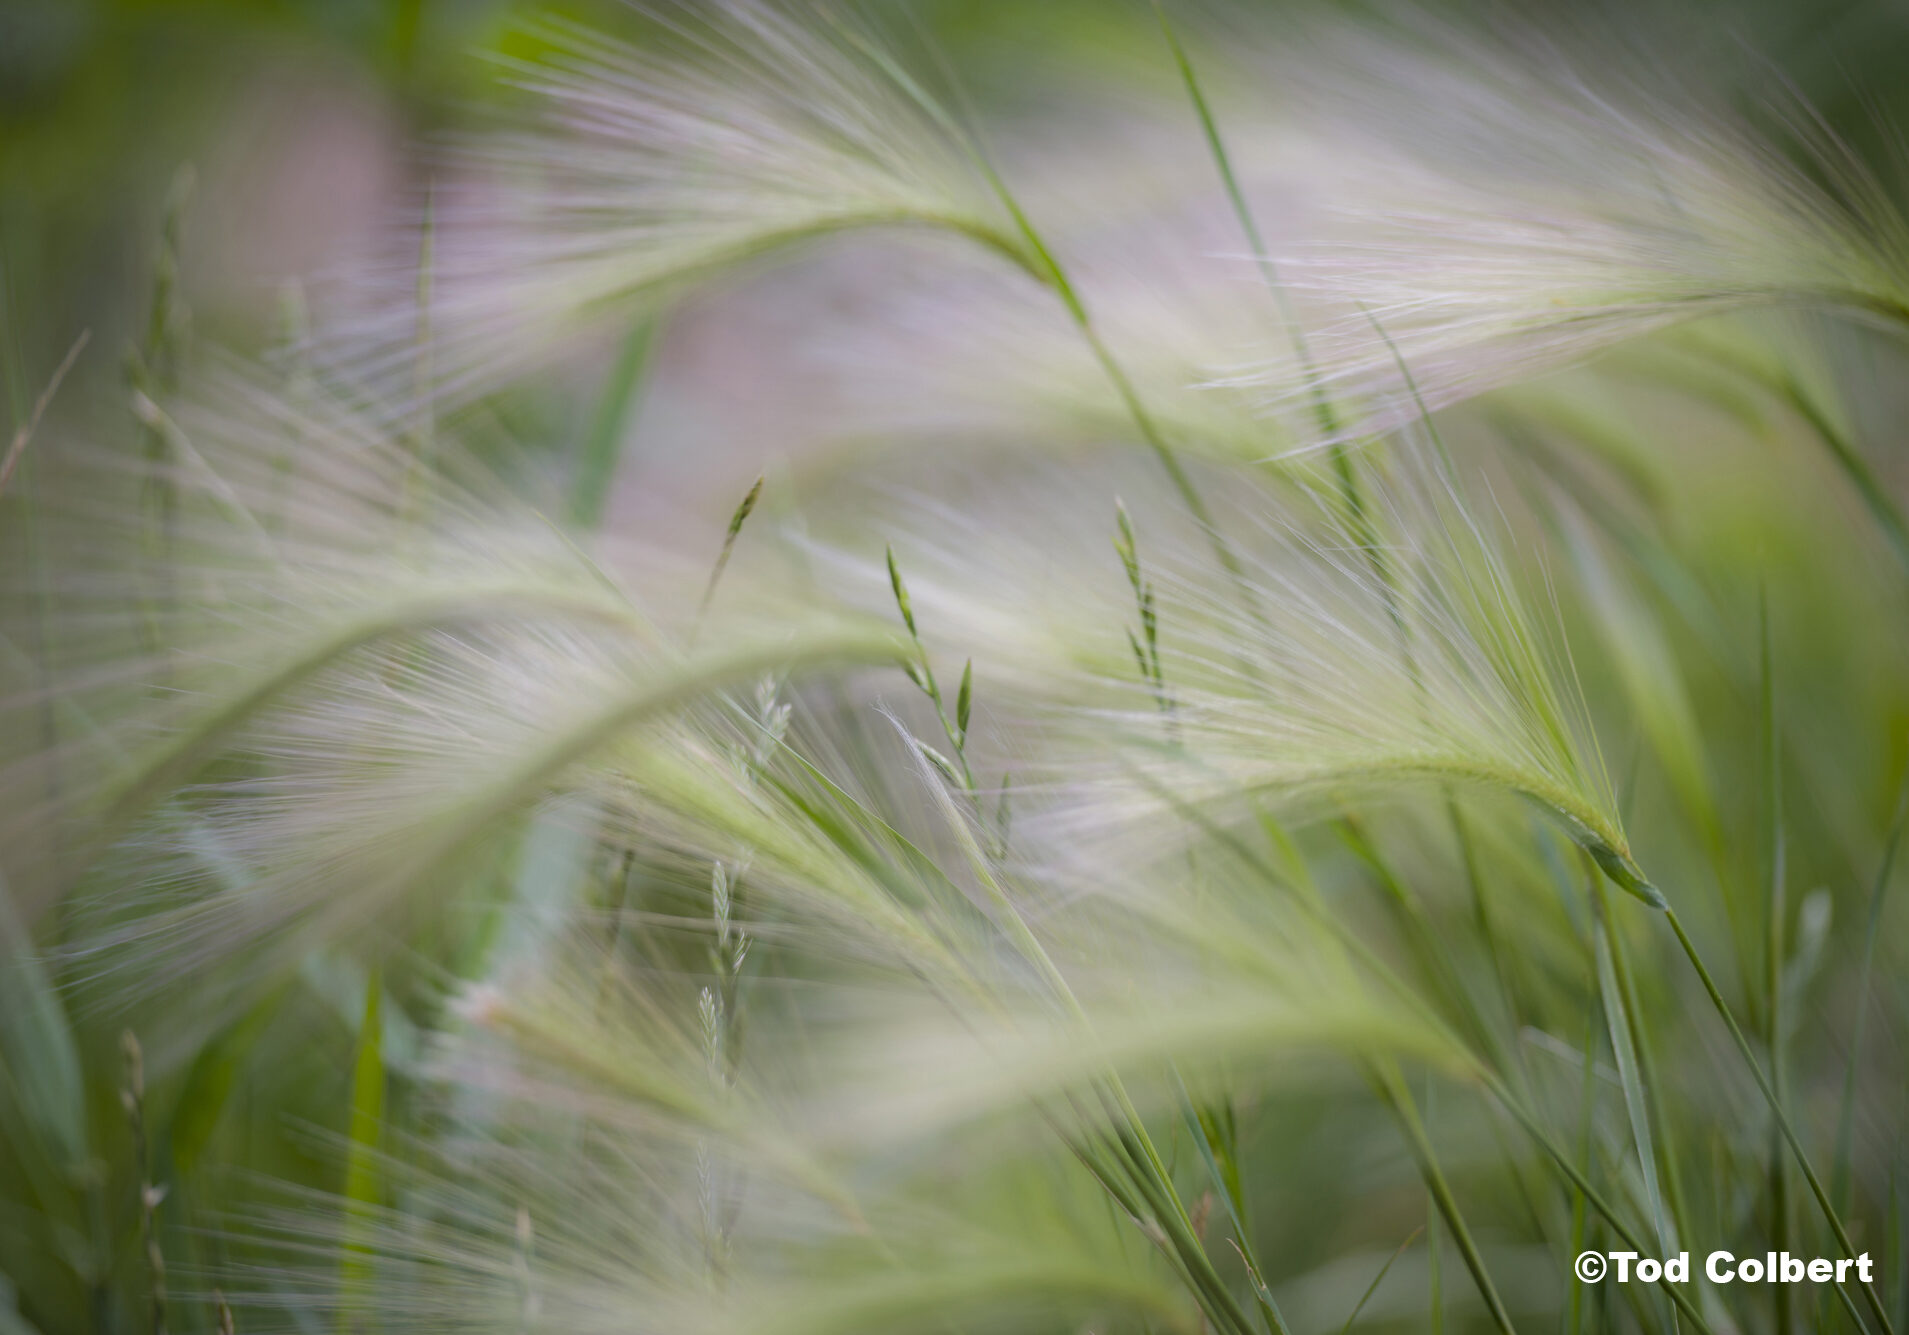 Tall grasses blowing in the wind